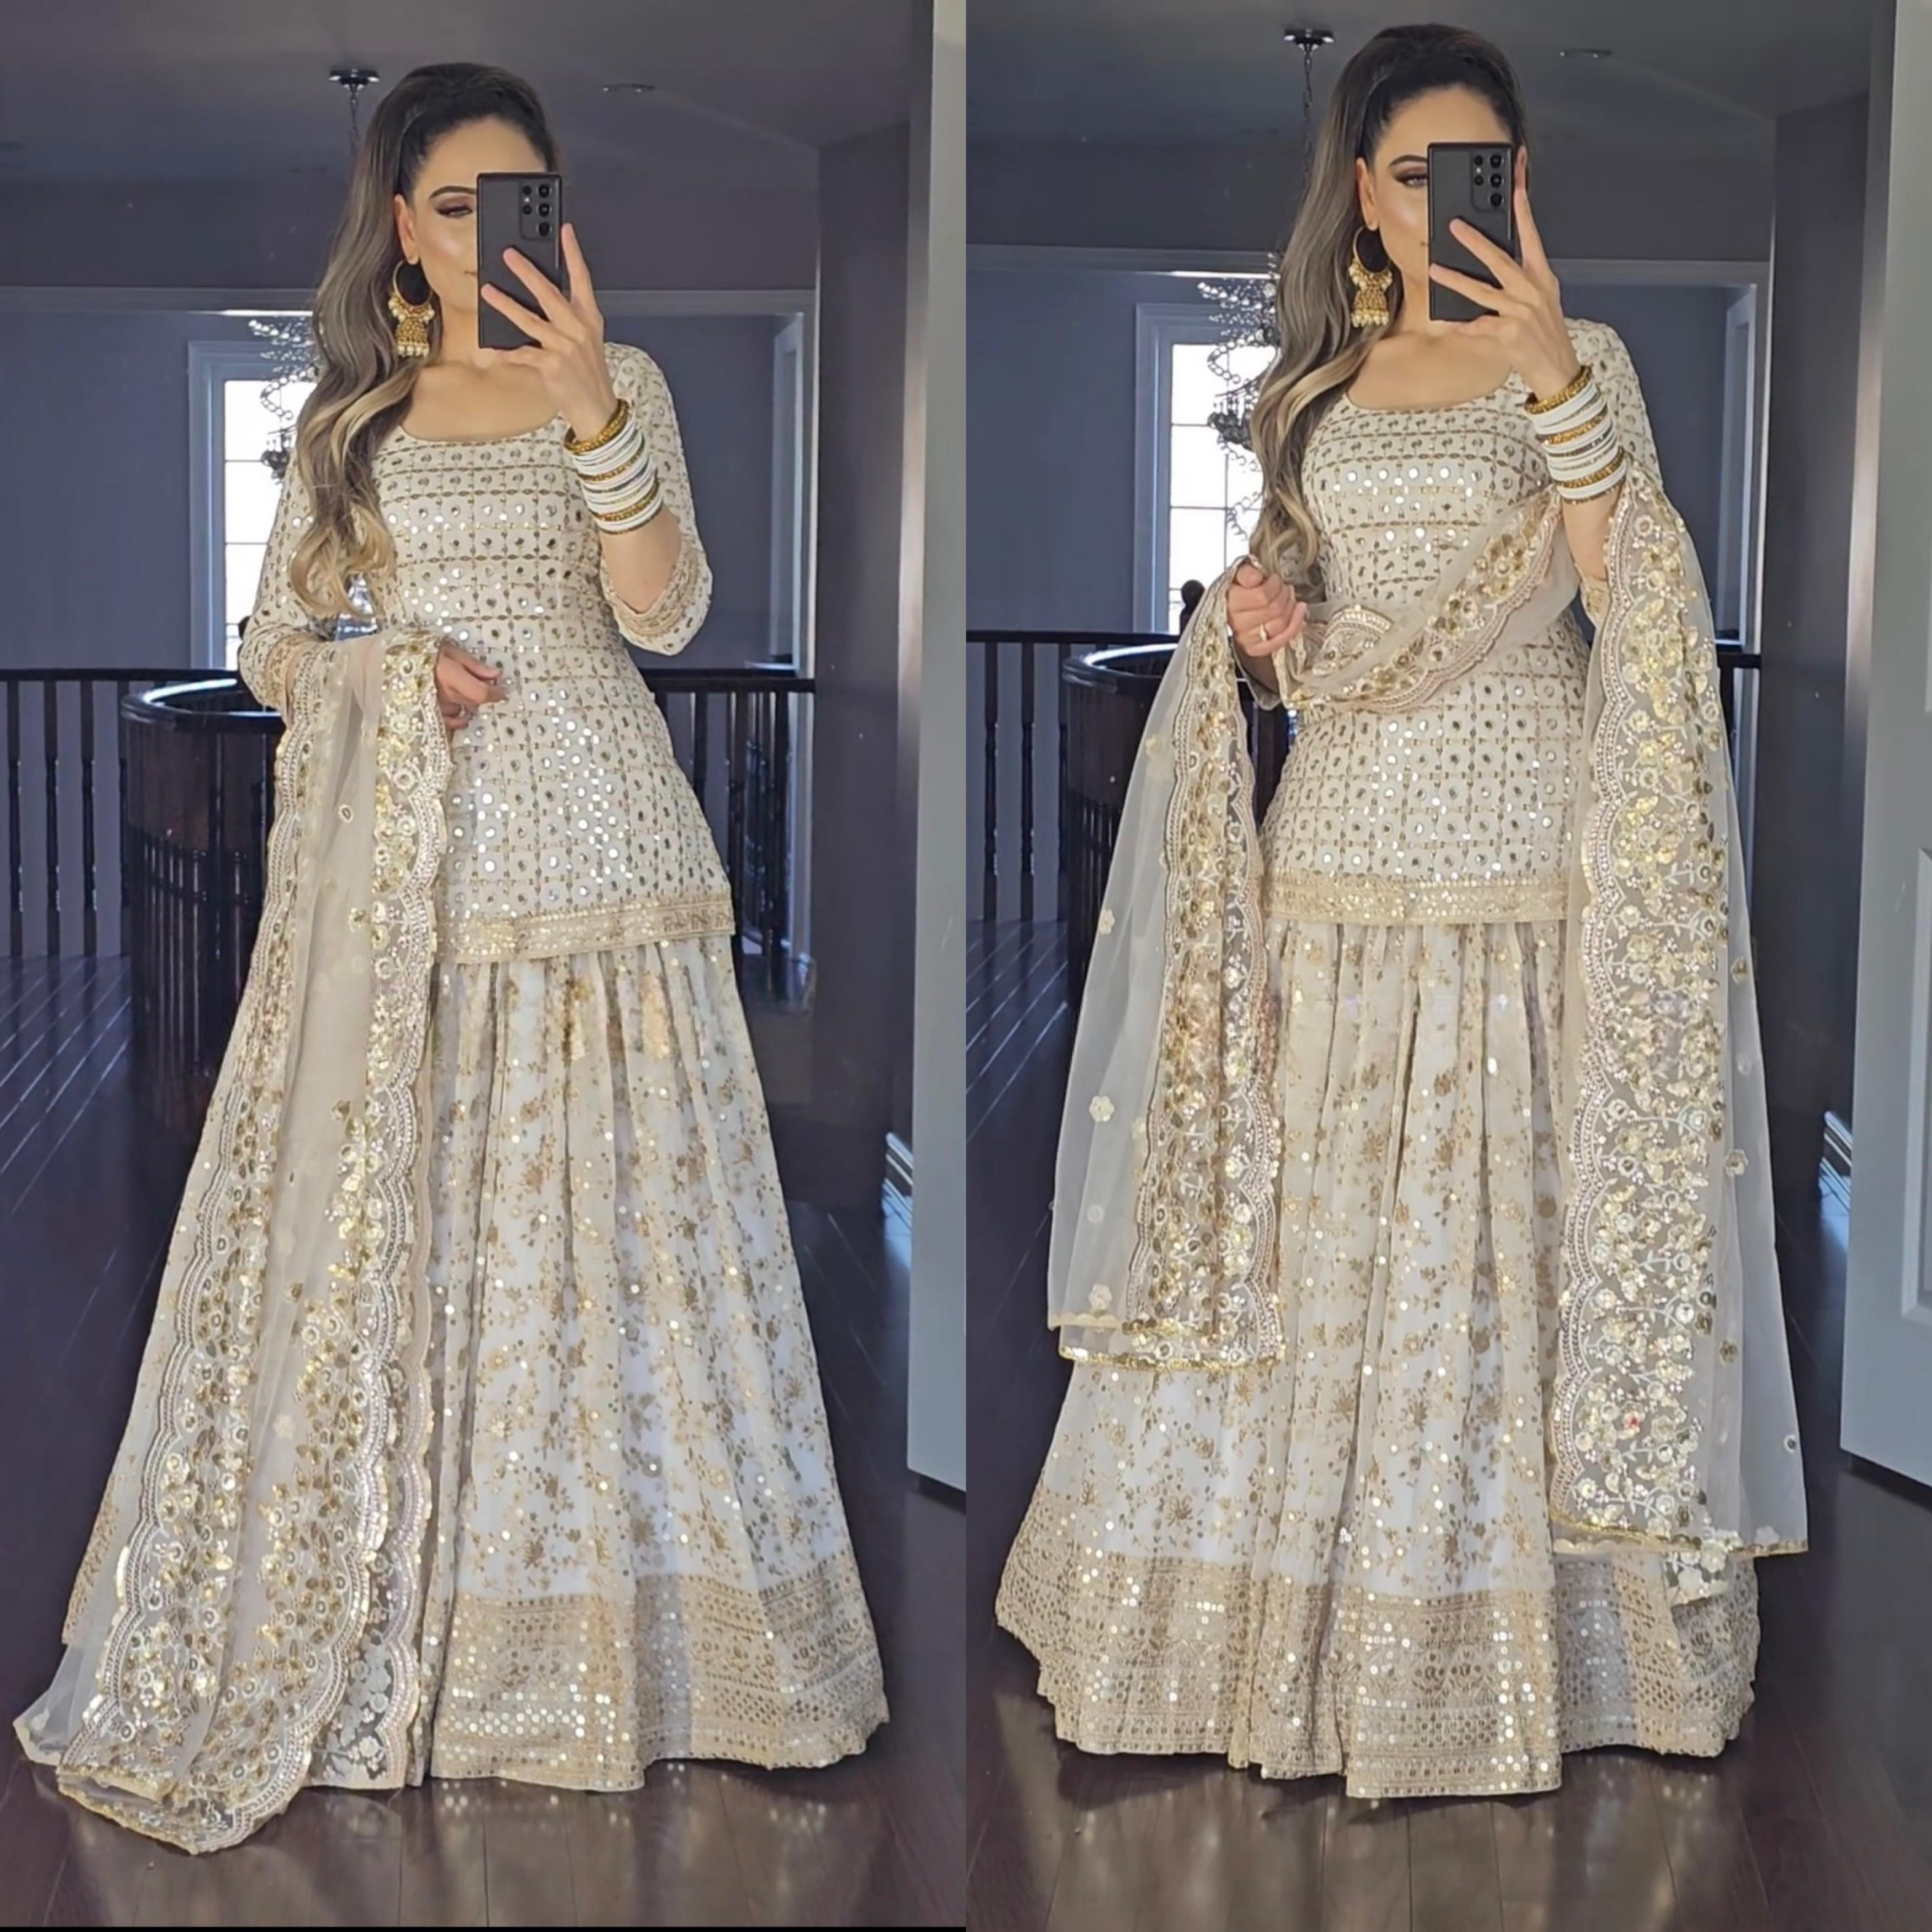 Captivating Embroidery Work White Color Lehenga Suit